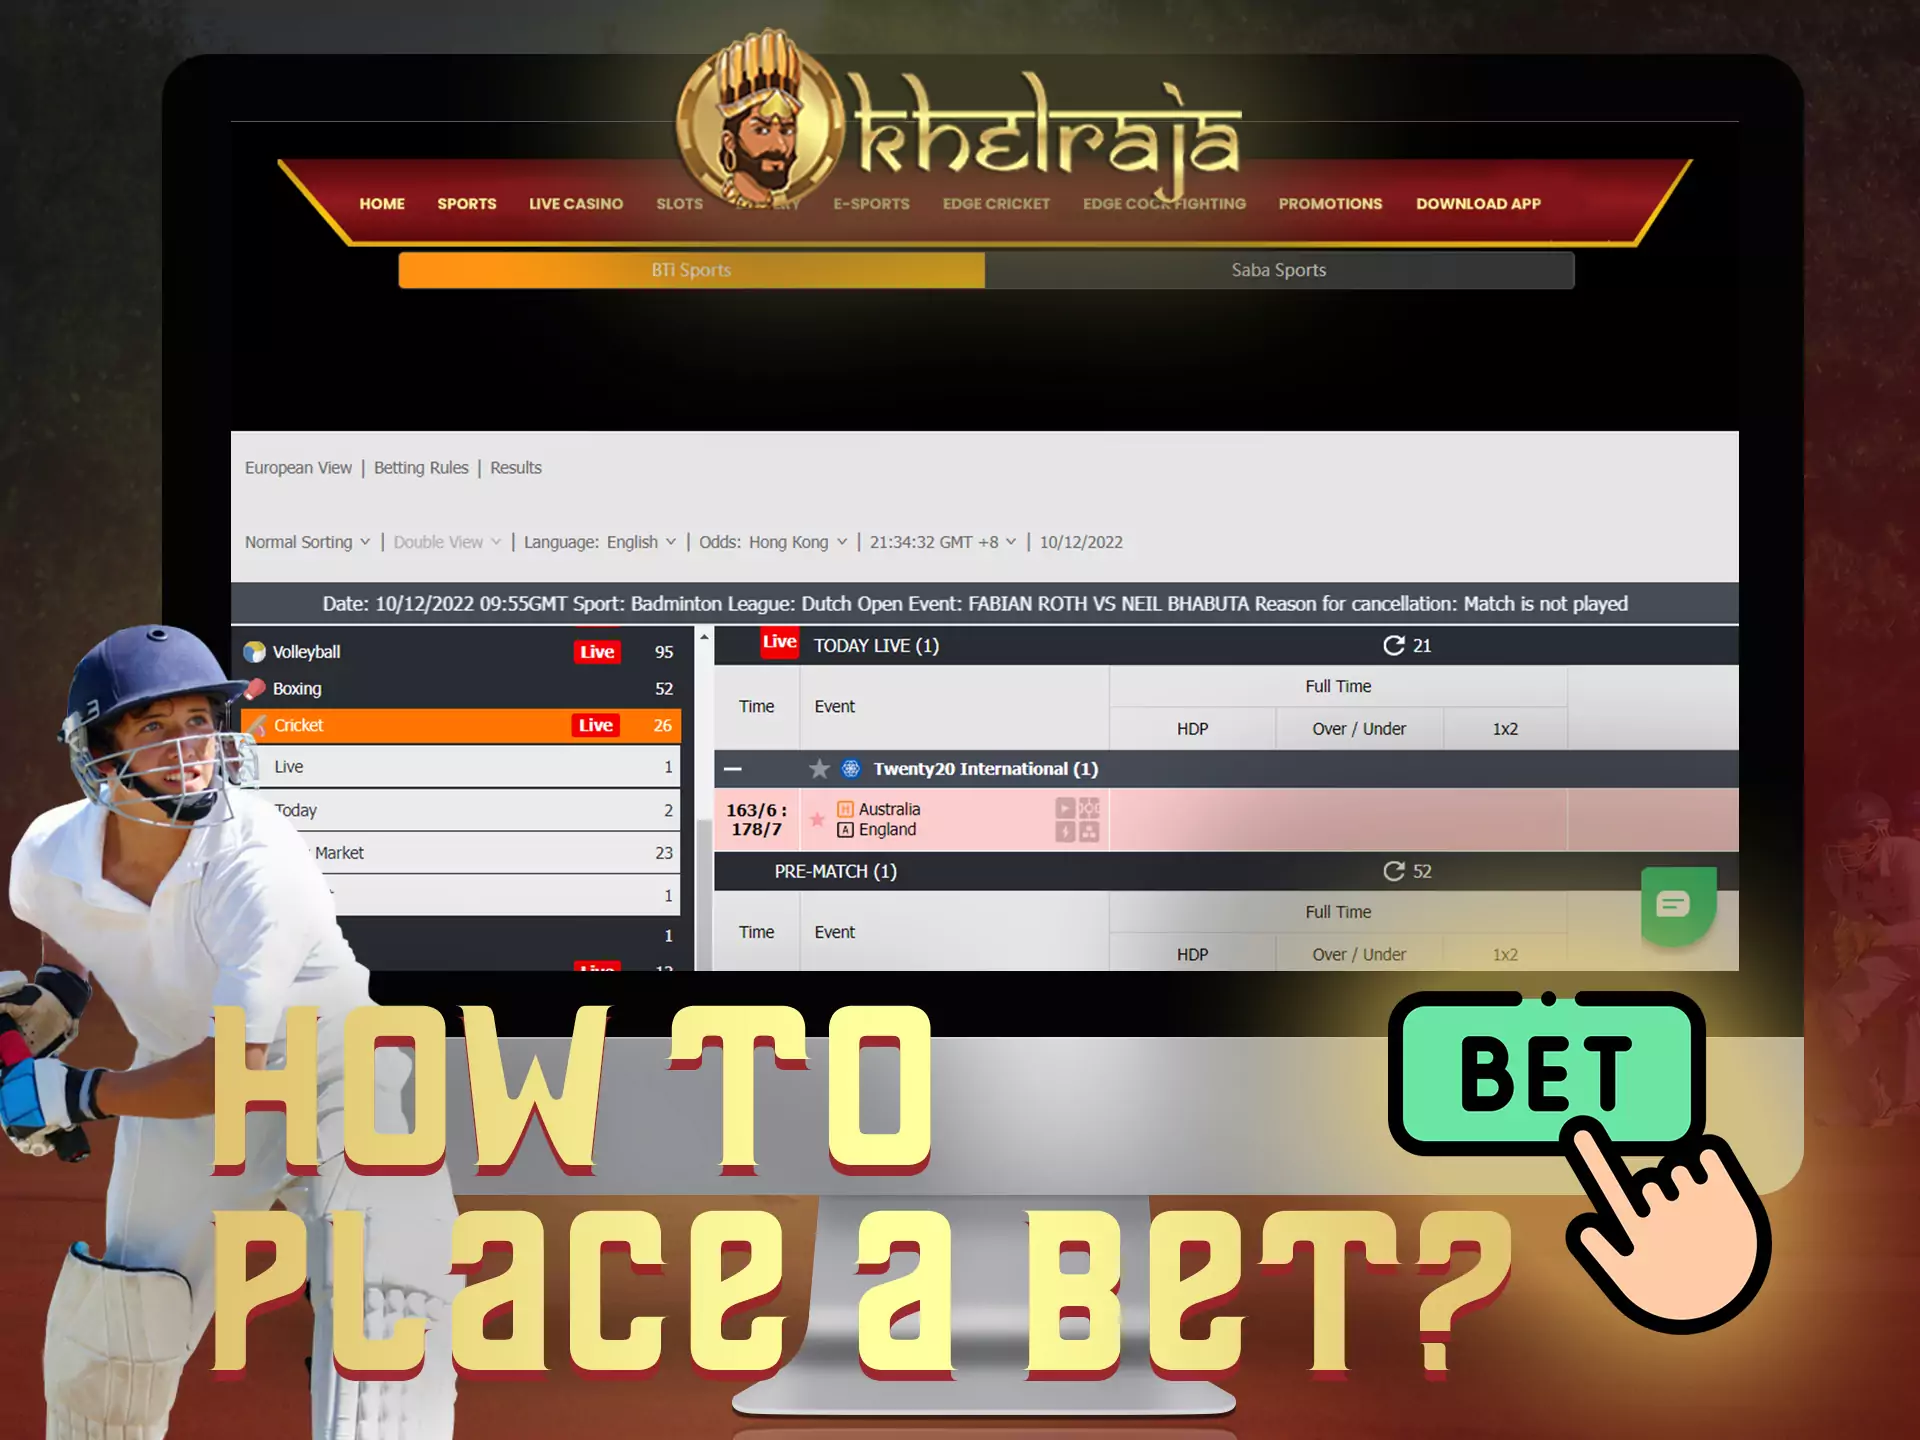 On the Khelraja website, you can place bets on any available event.